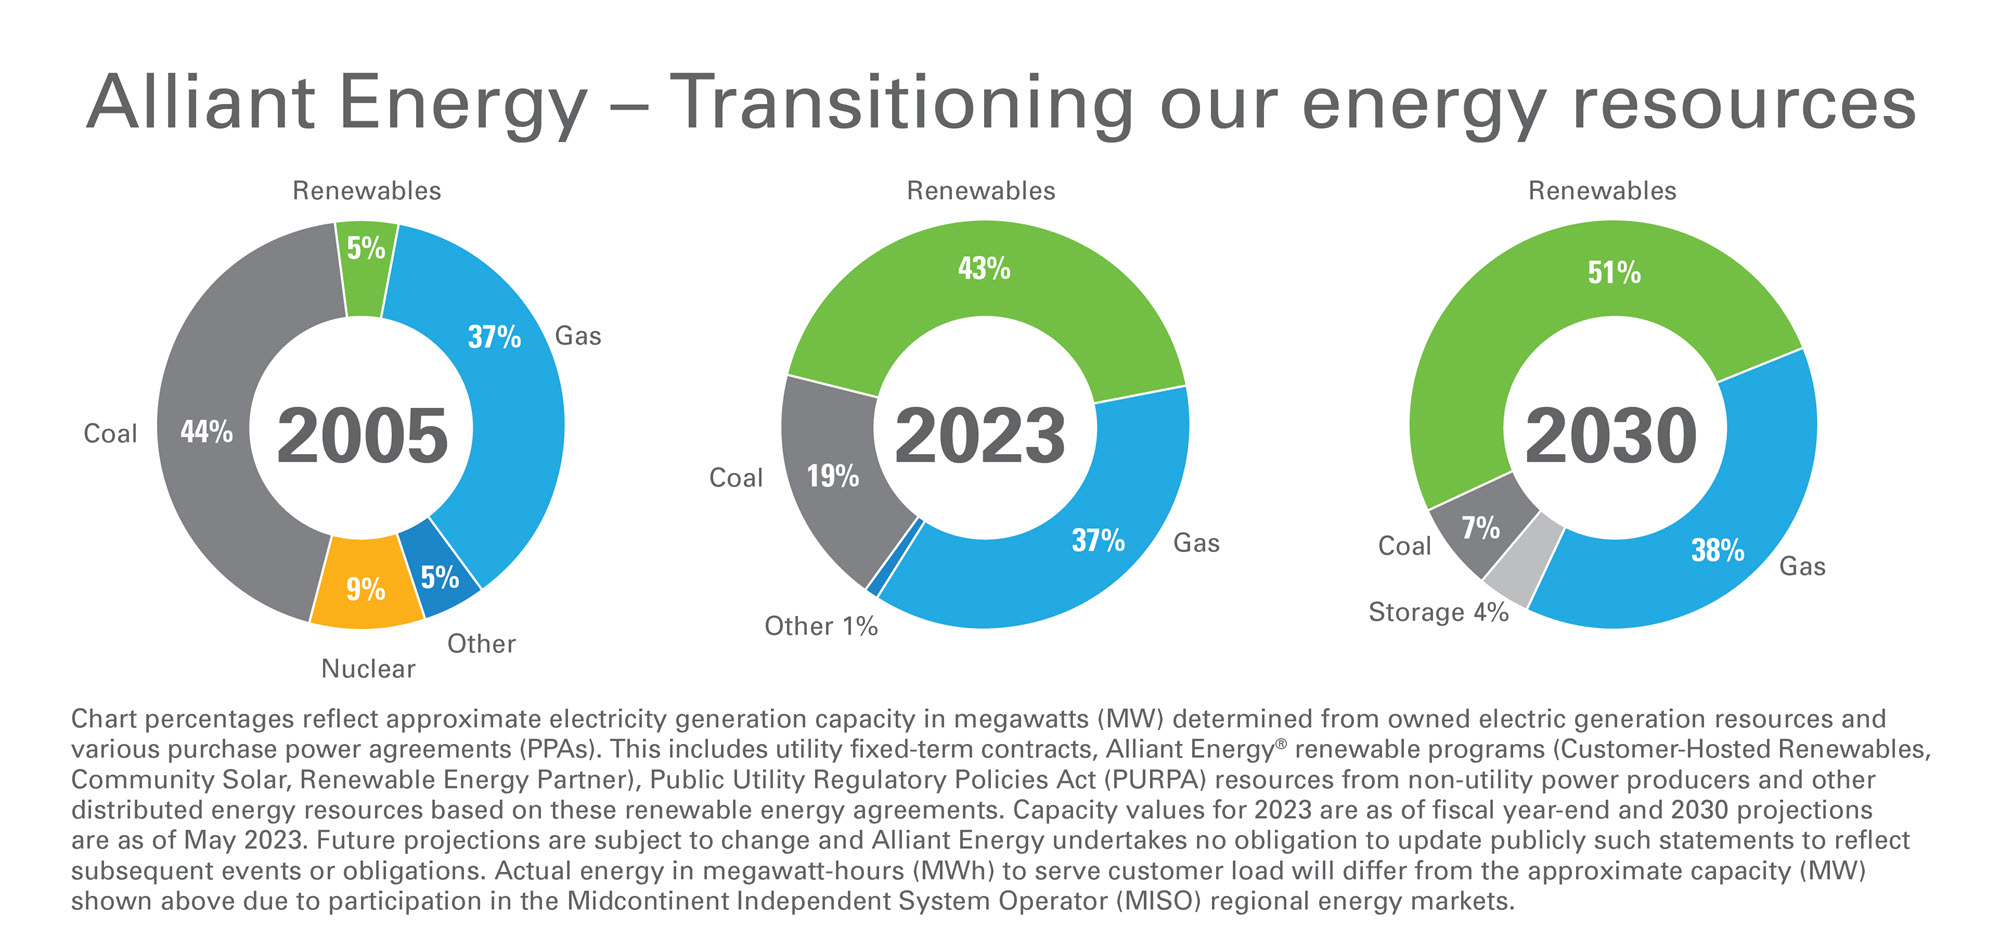 by 2030 our energy portfolio is expected to be 54% renewable, 37% gas and 7% coal.